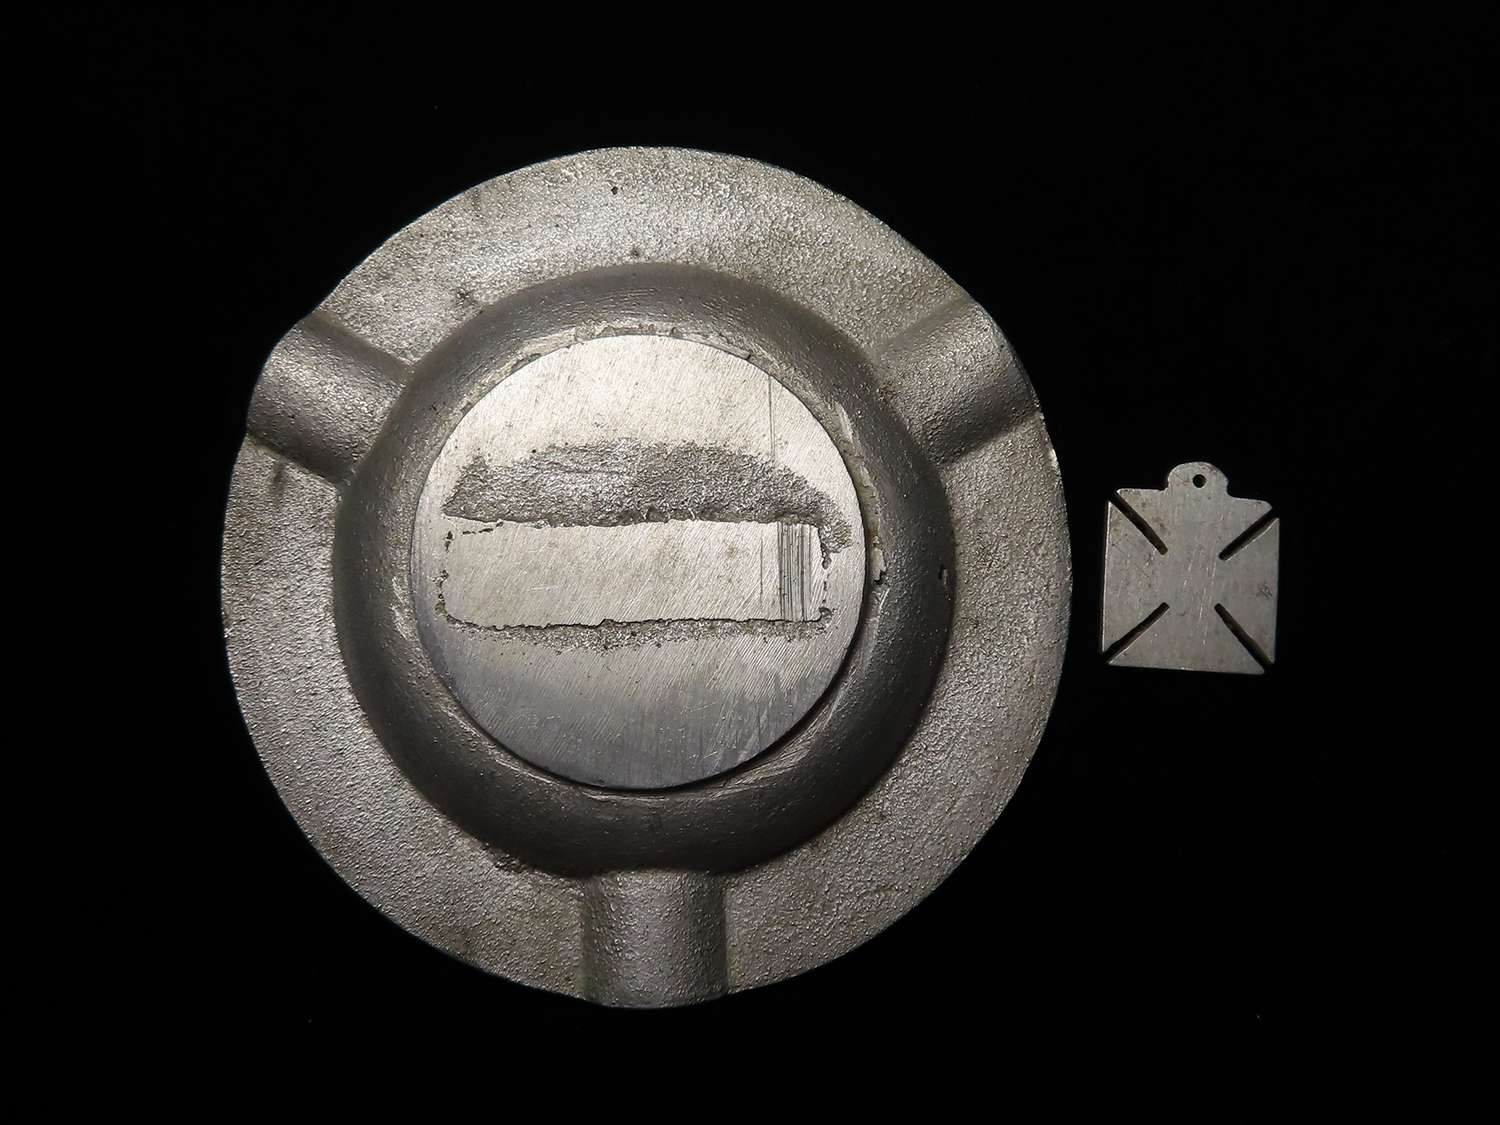 Airship interest - an ashtray 'Cast from Strafed Zeppelin Z48', with an Iron Cross stamped 'Z48 ZEPP - Image 2 of 2